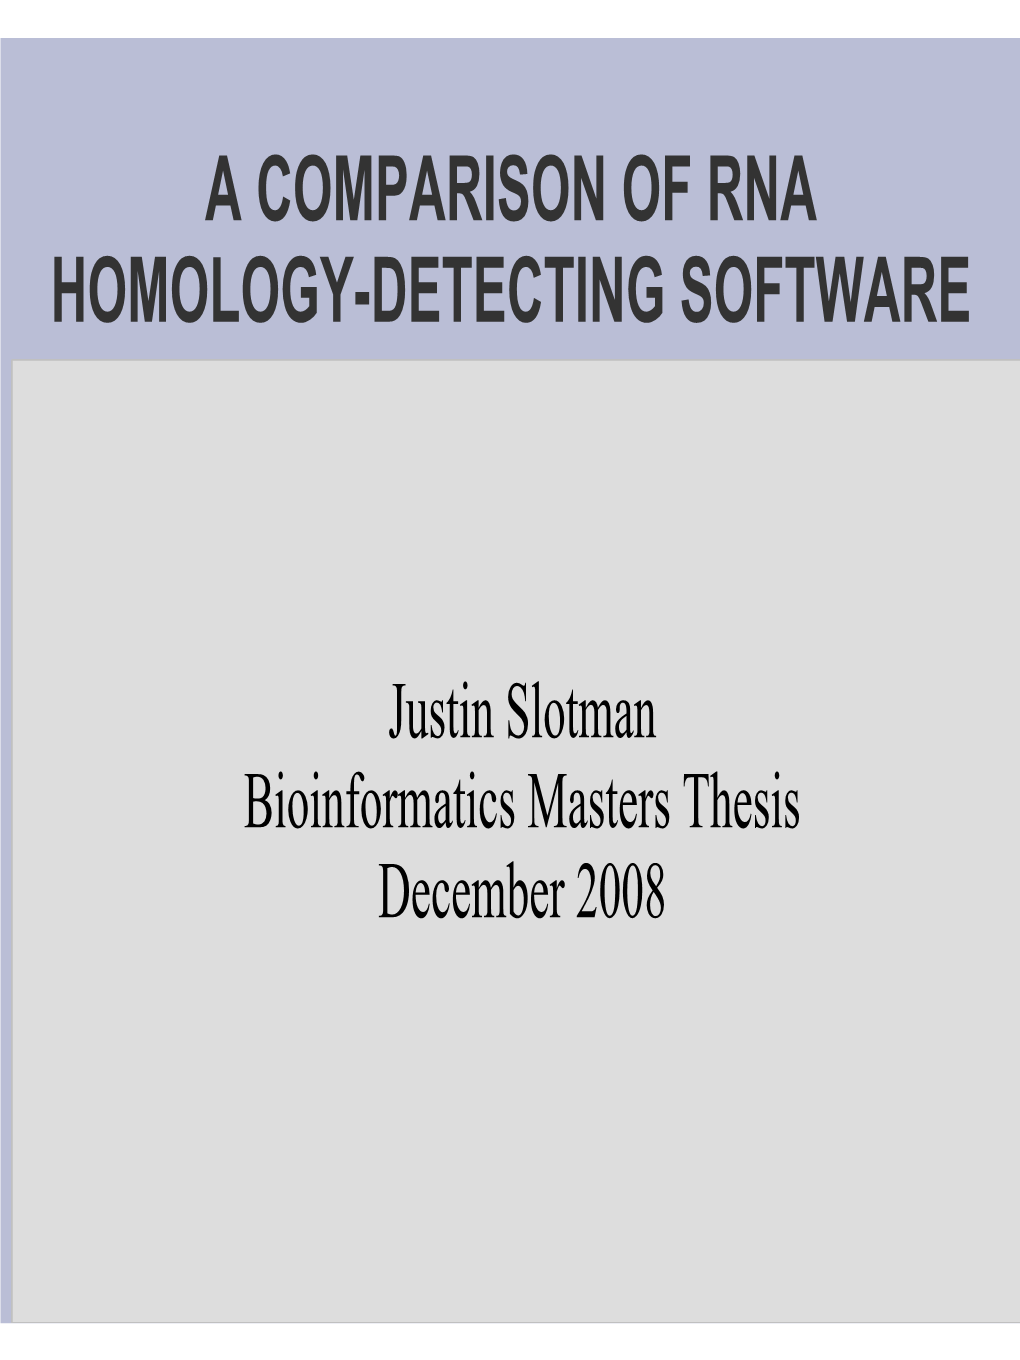 A Comparison of Rna Homology-Detecting Software